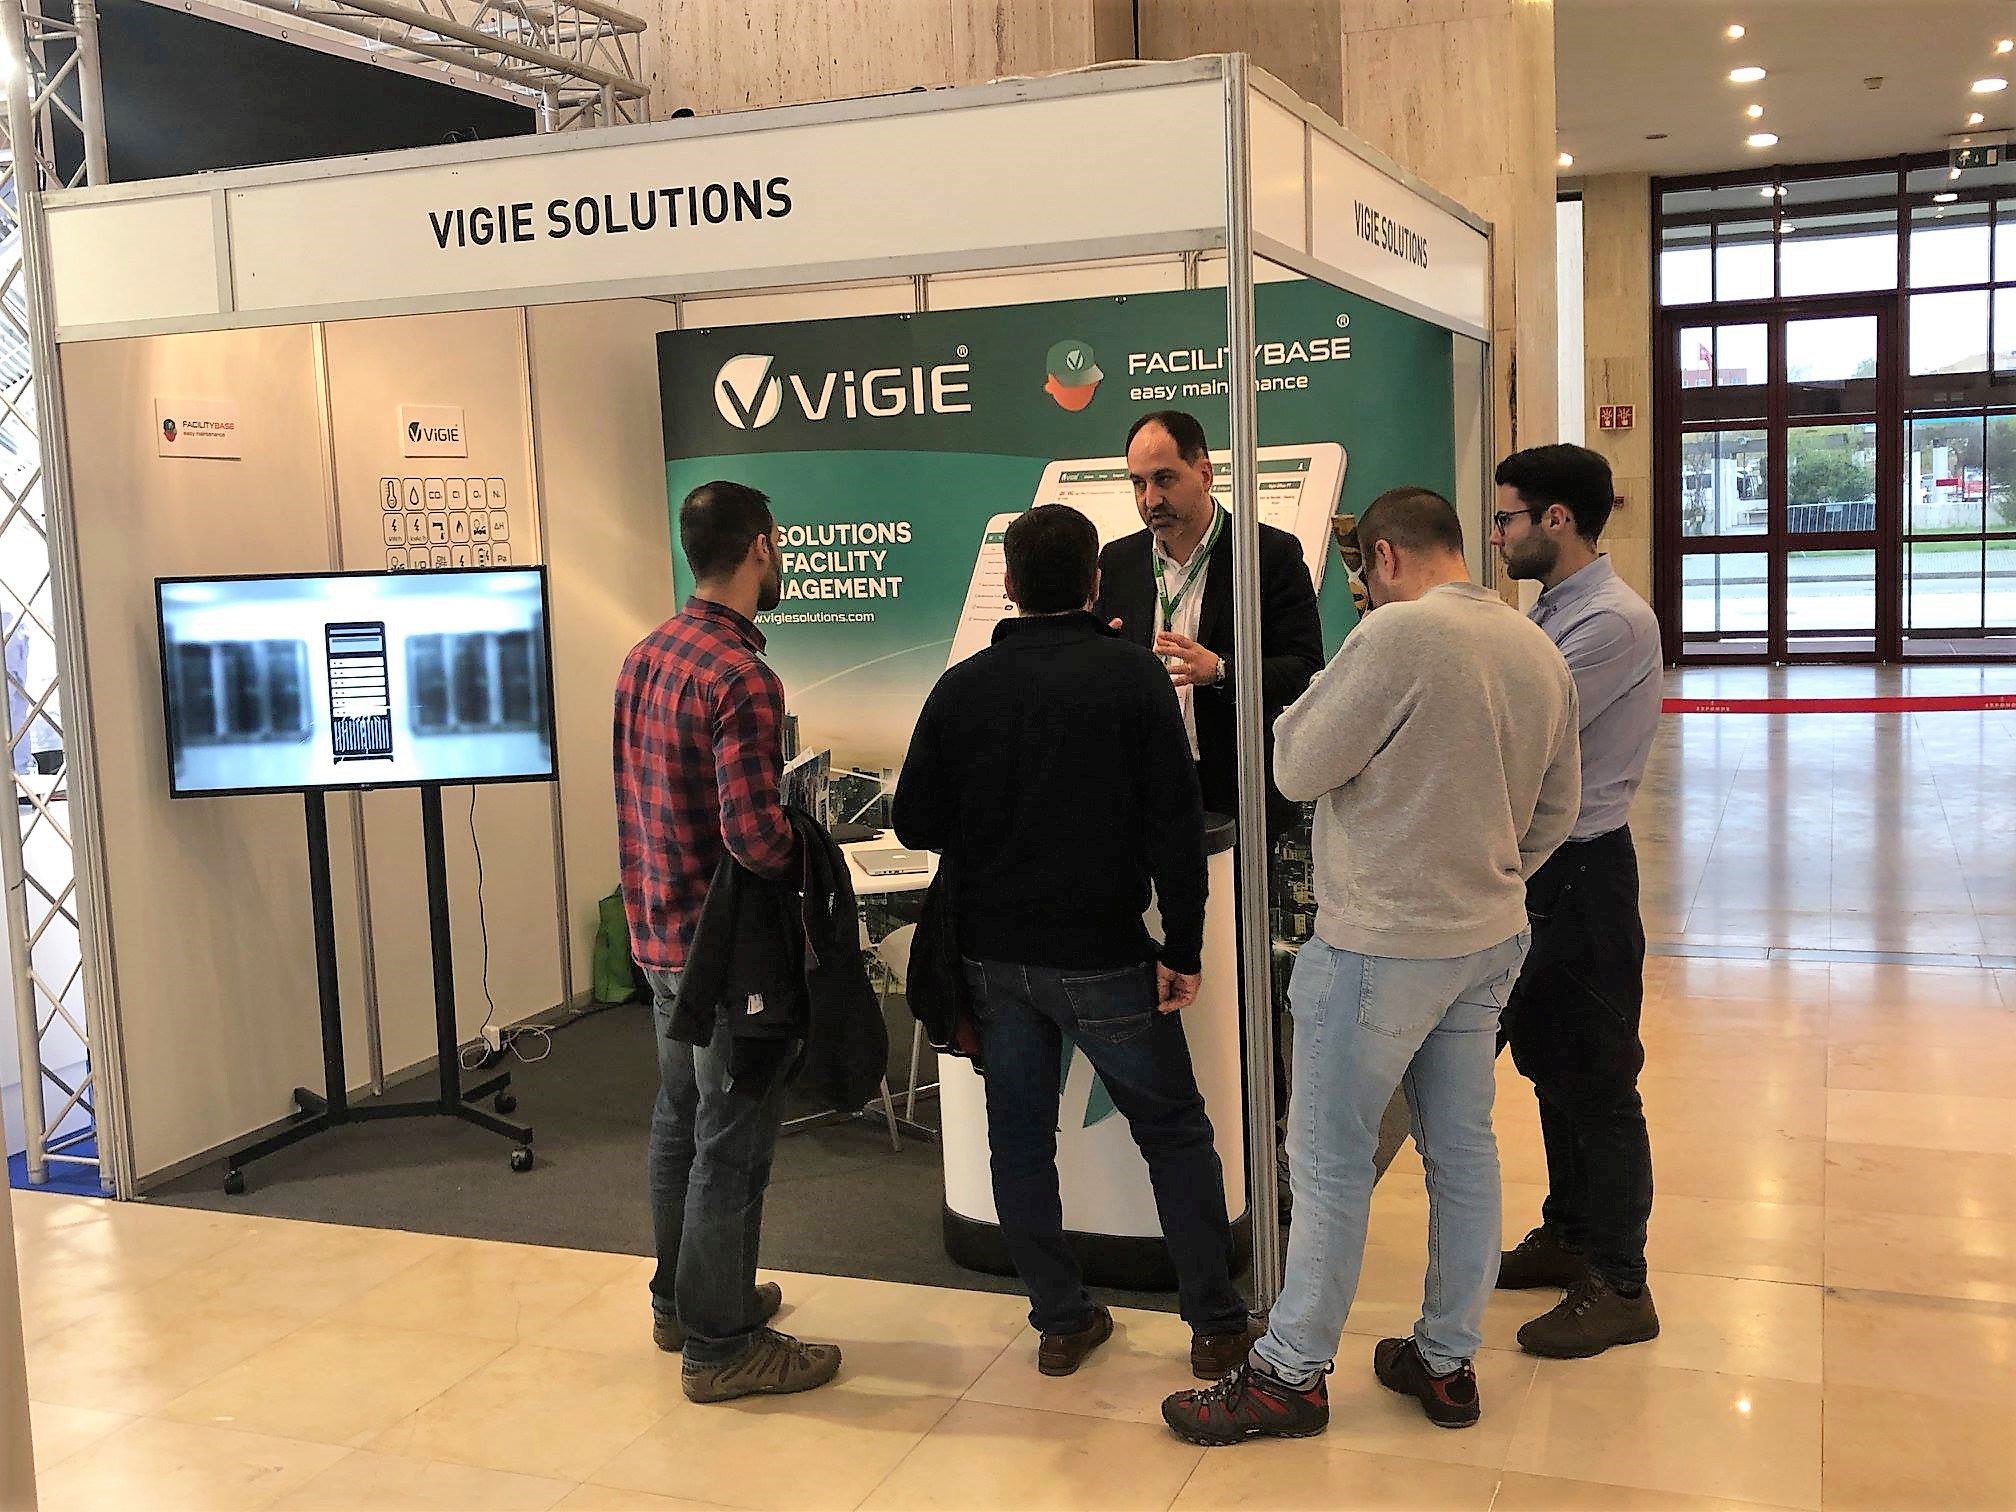 ViGIE and ISICOM participated in the EMAF - International Fair of Machinery, Equipment and Services for Industry